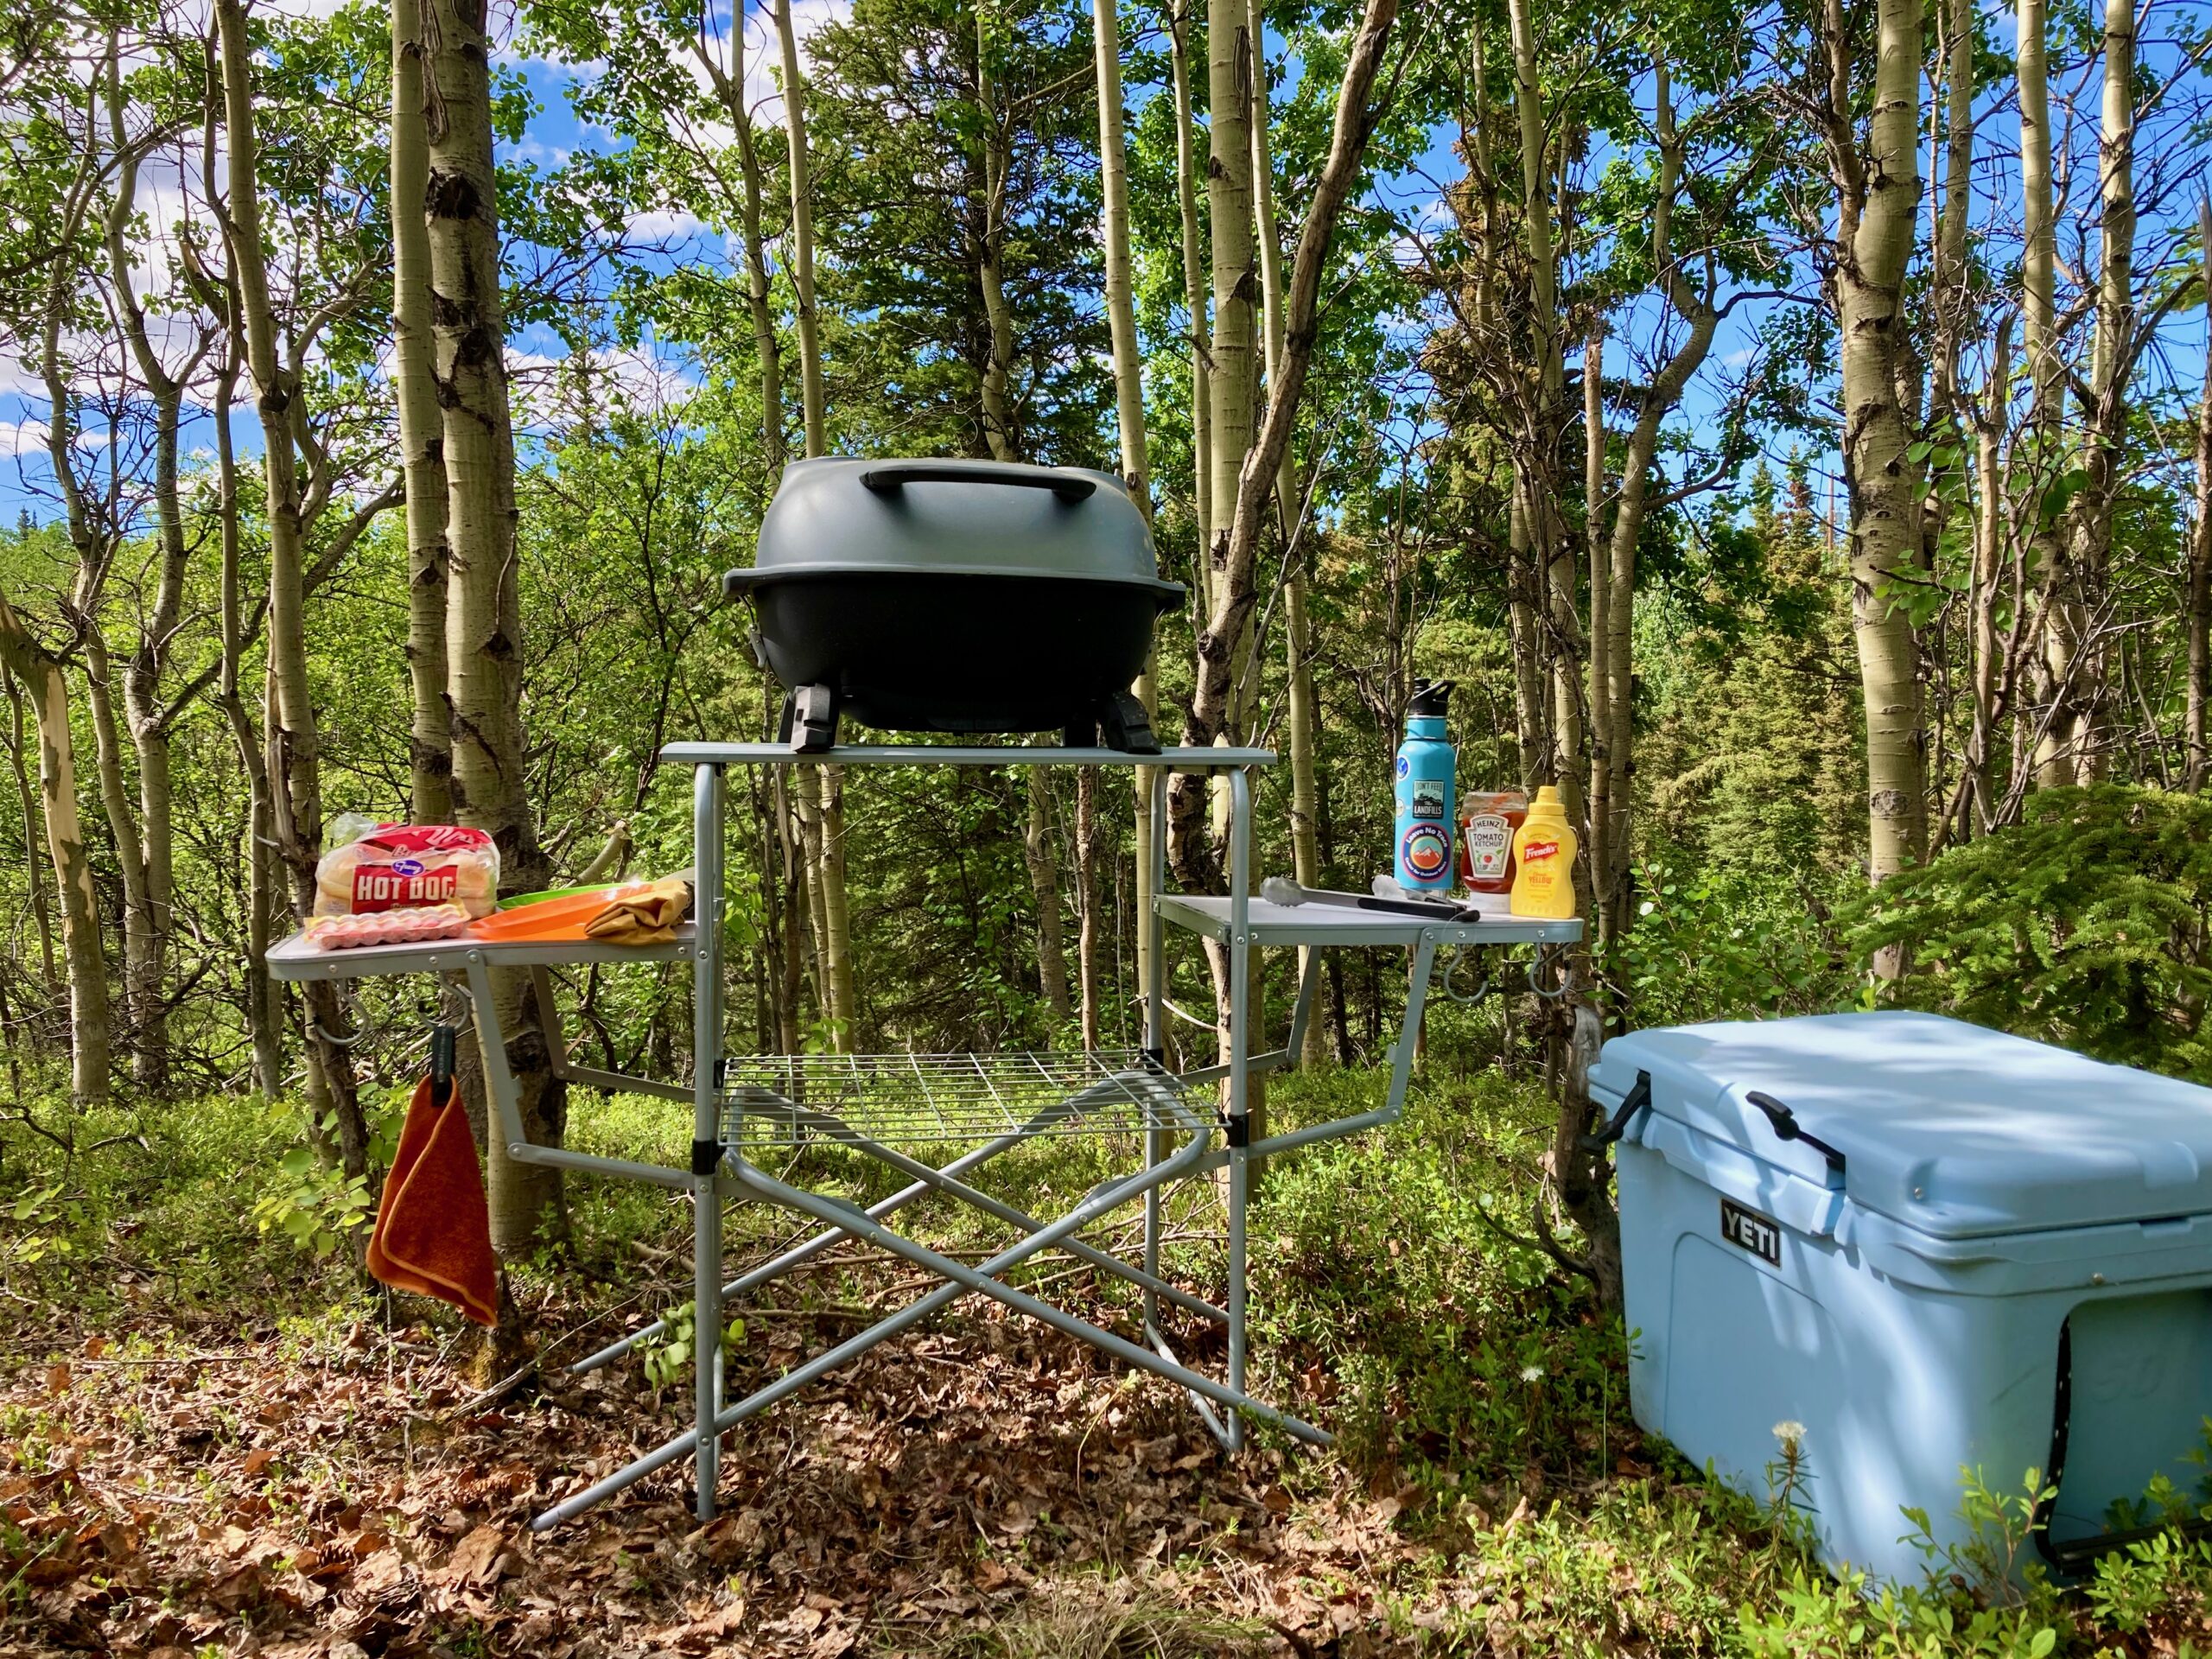 The Camco Grill table is one of the best camping kitchens.